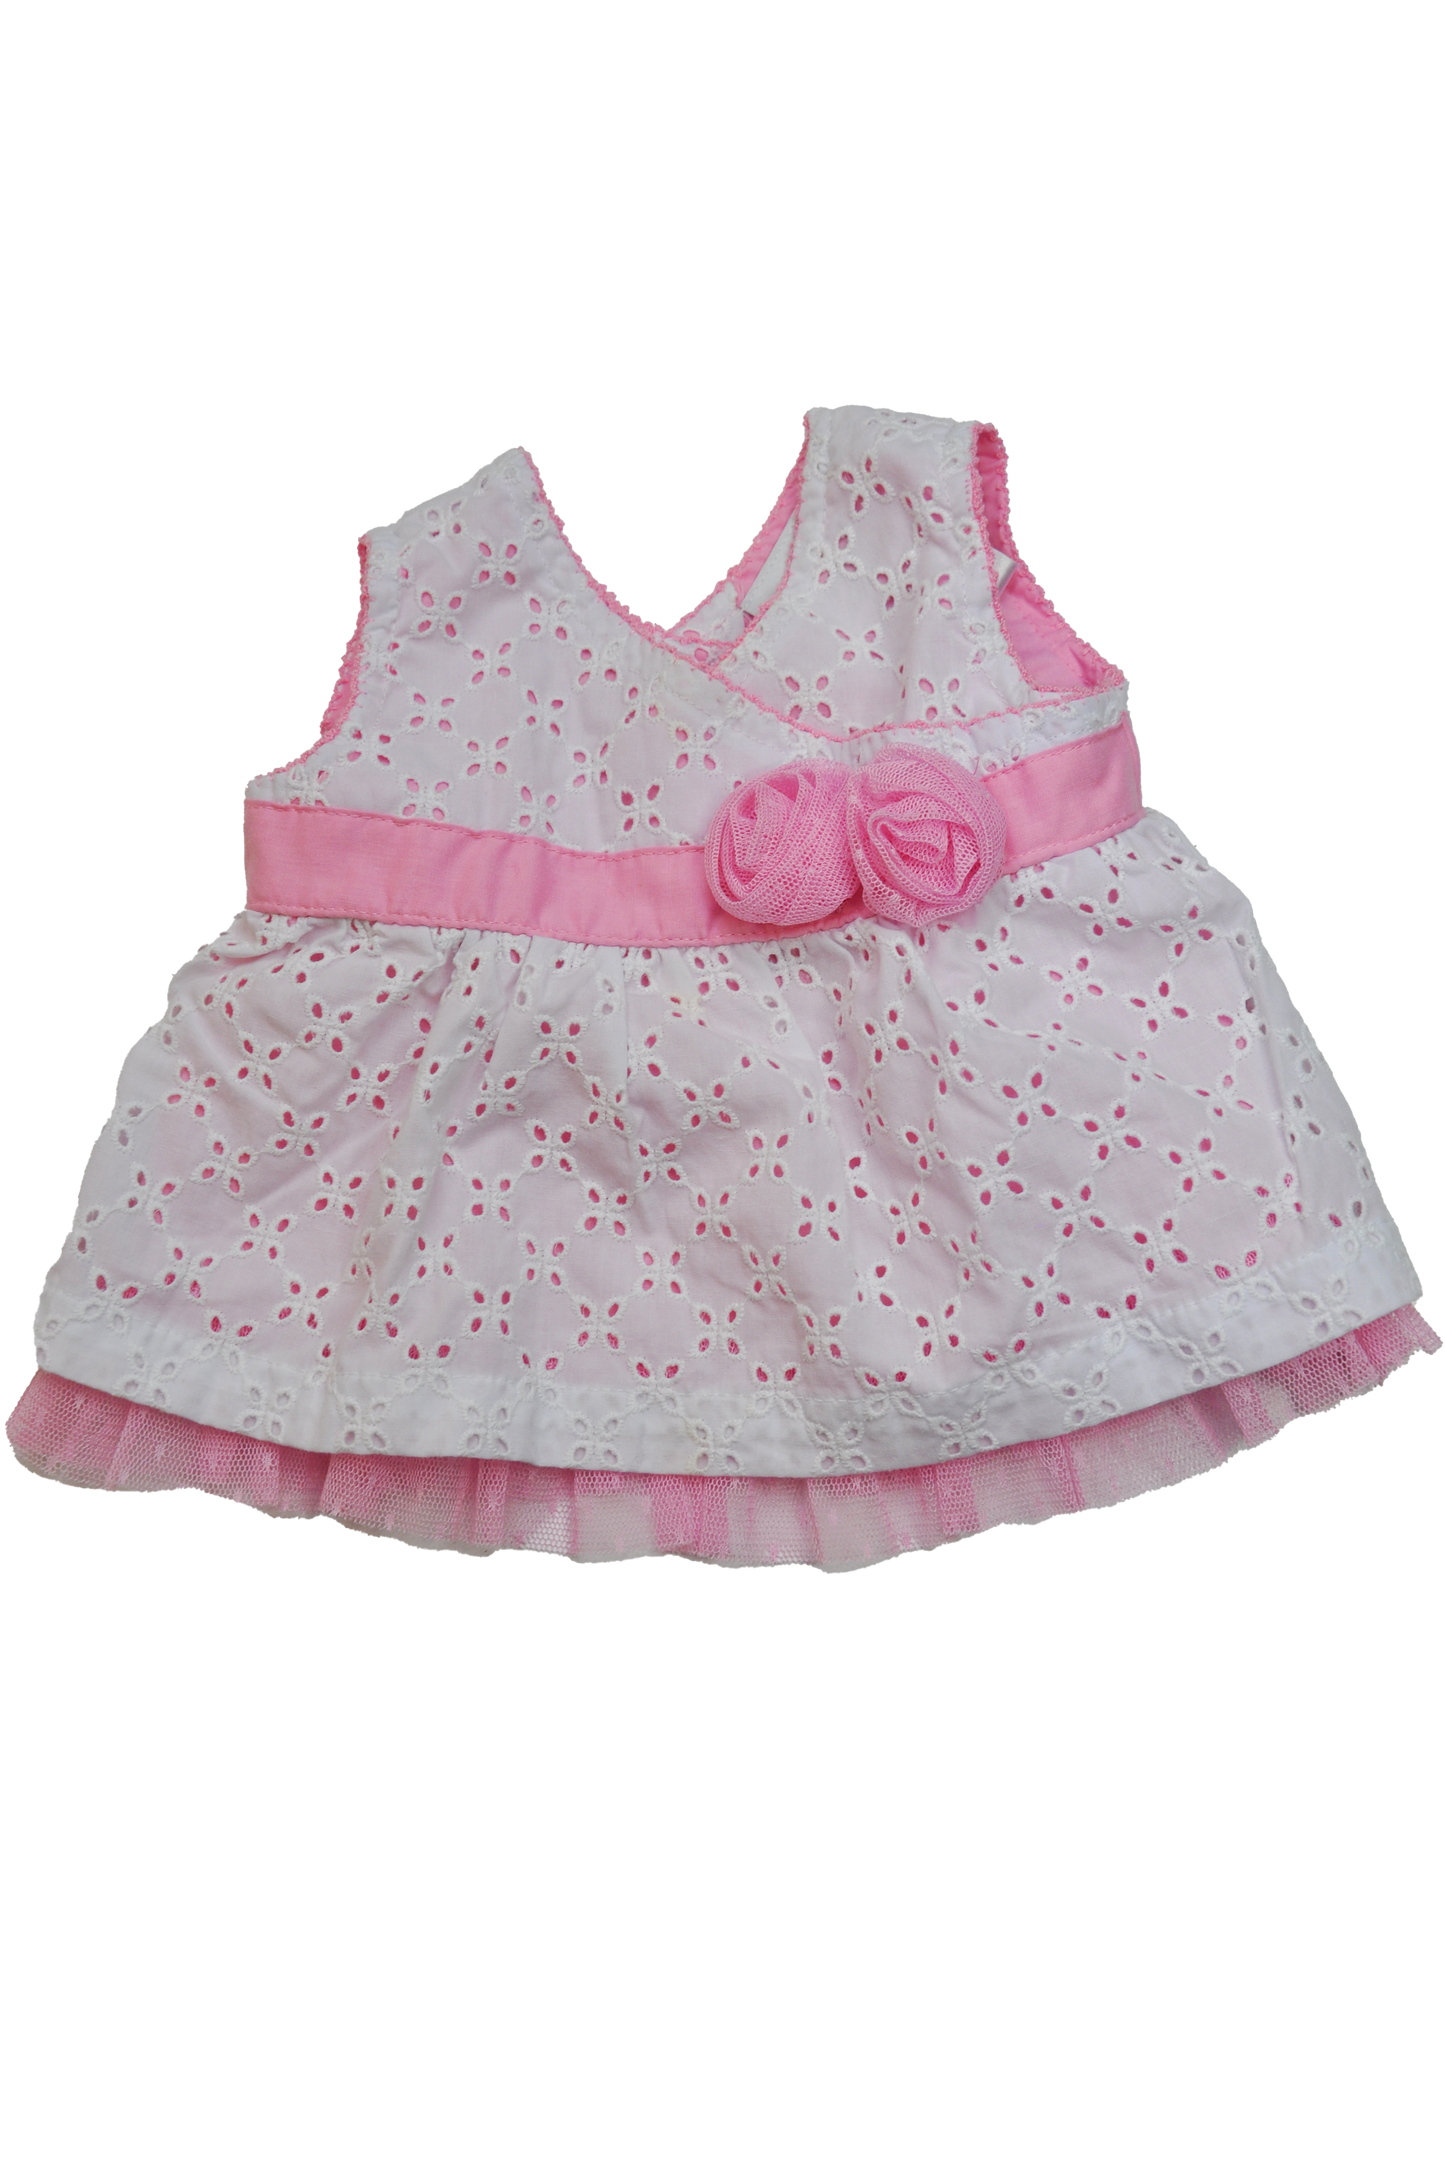 Sugar Cookies White Eyelet Dress with Pink Tulle Flowers 0-3M